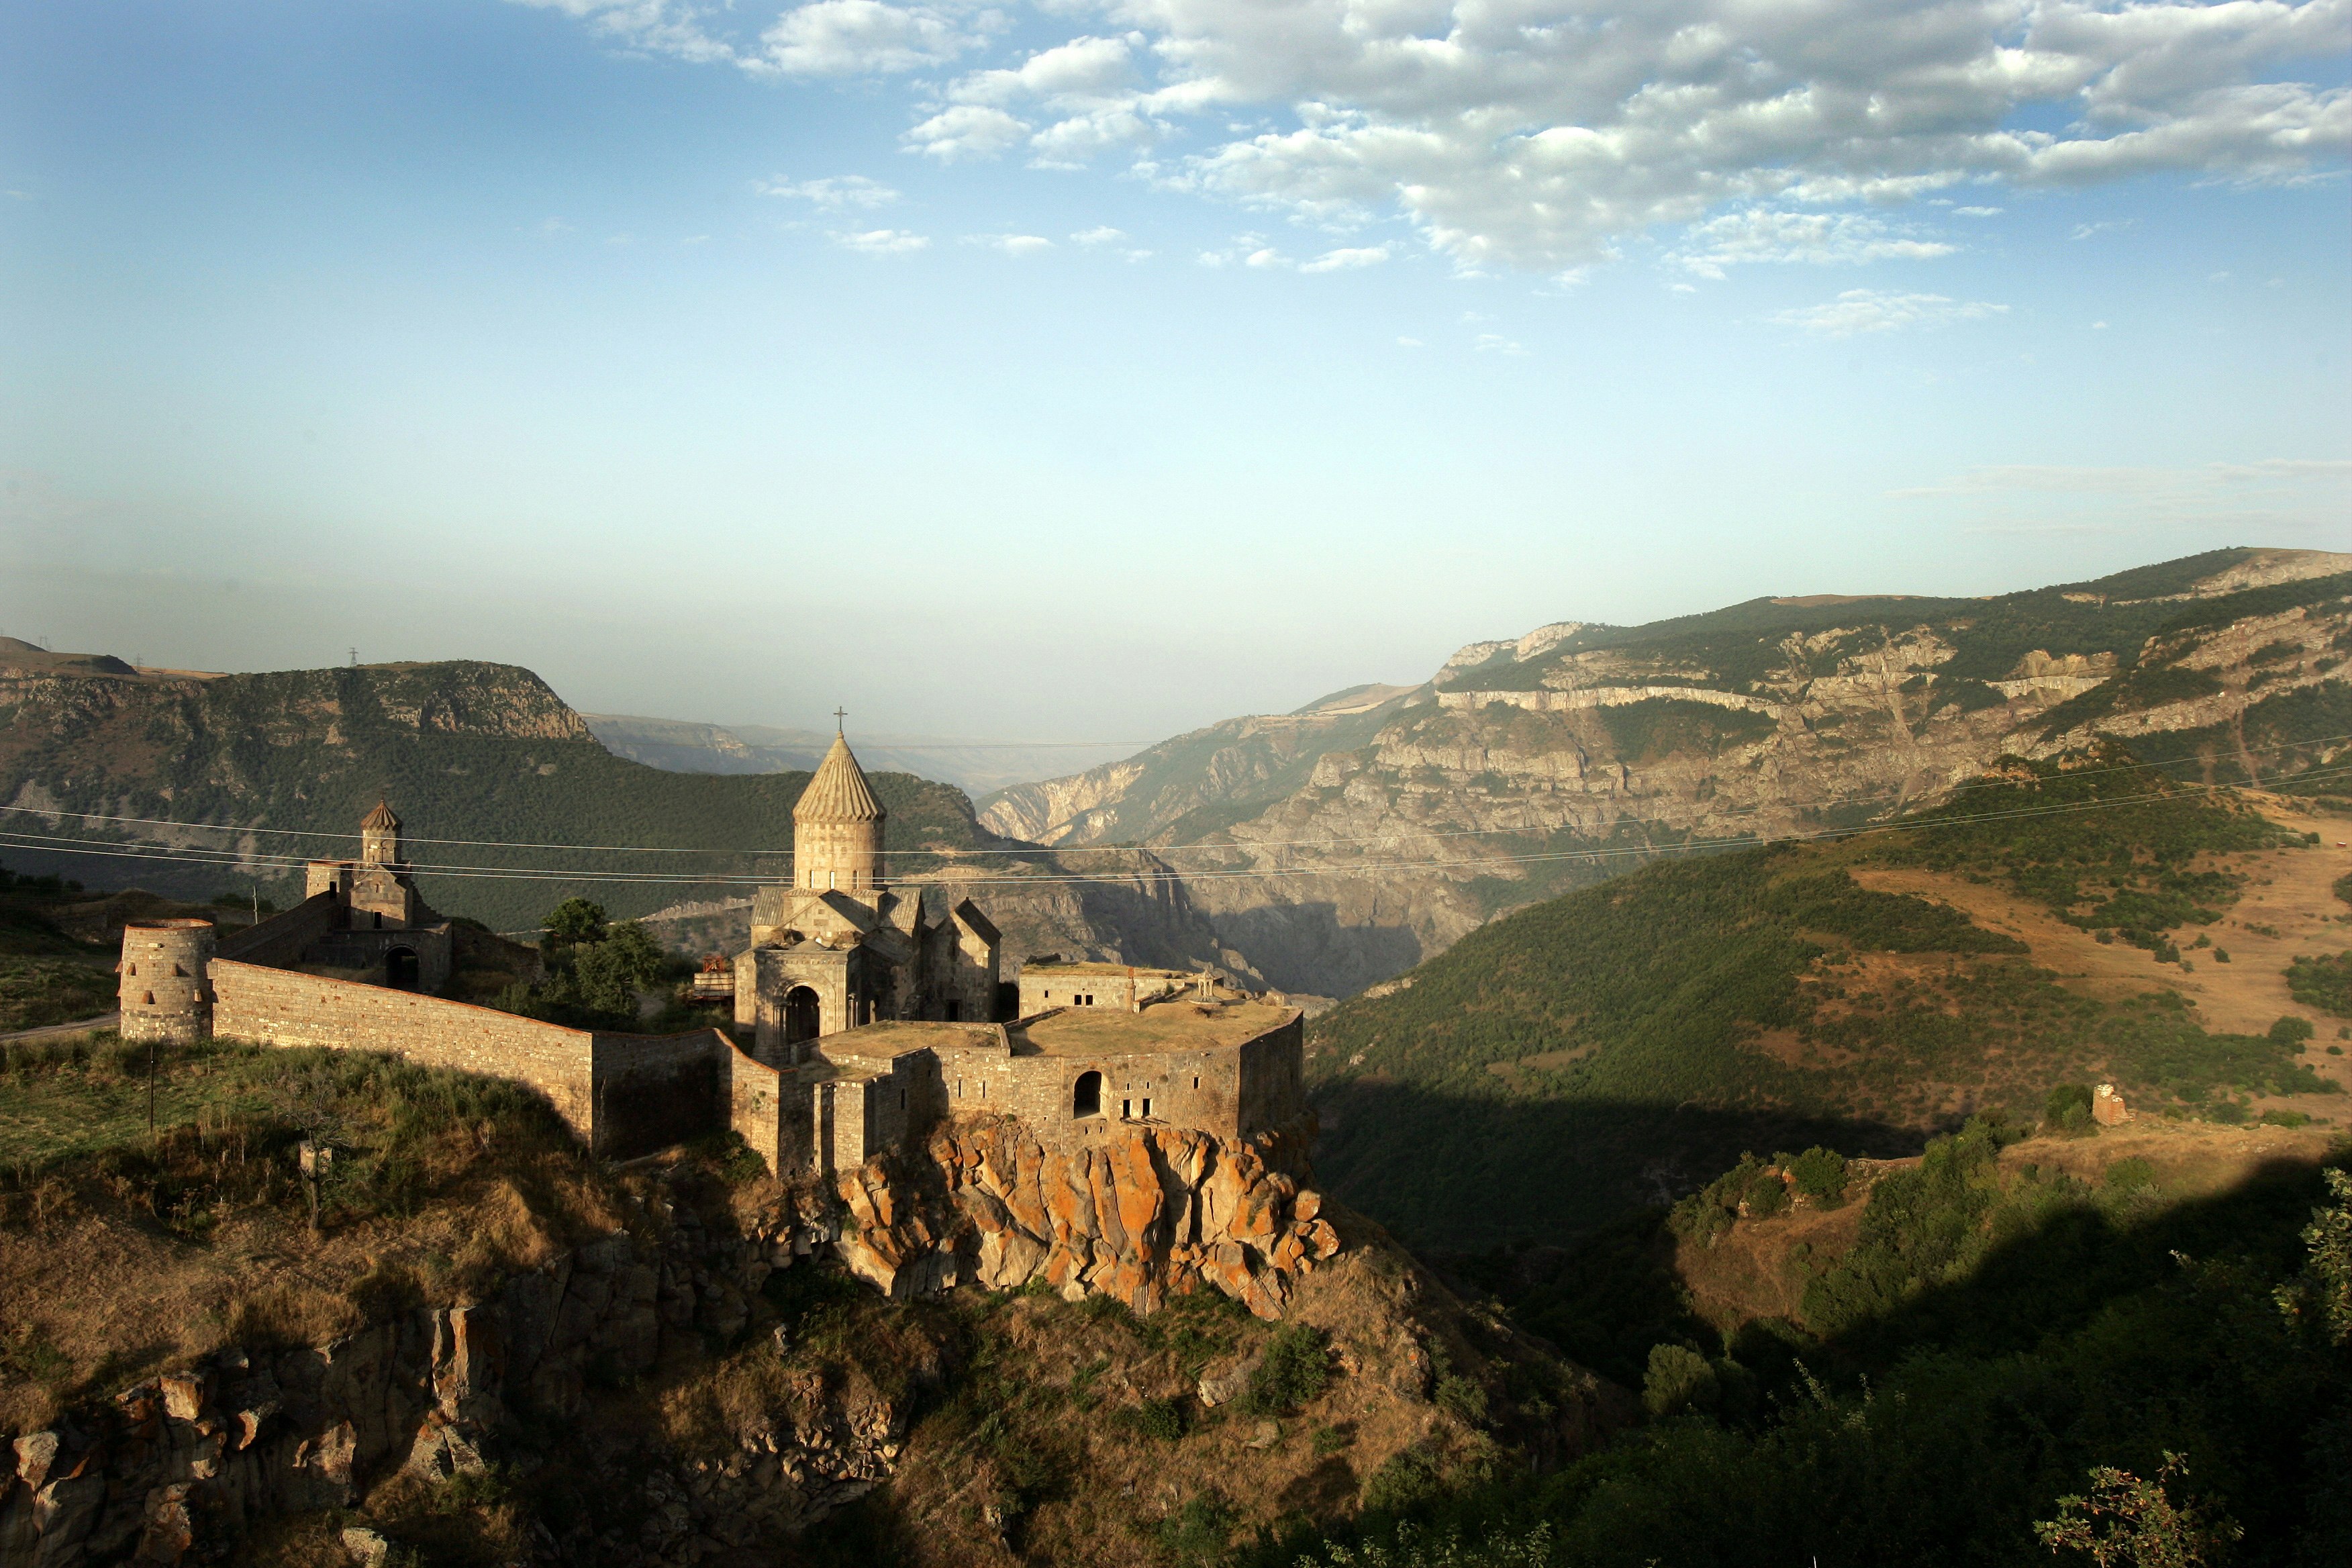 The monastery at Dadivank is situated on a rocky ridge with some green scrub grass covering the orange volcanic grown. In the background are more rocky ridges and hills extending to a cloud-lined horizon.